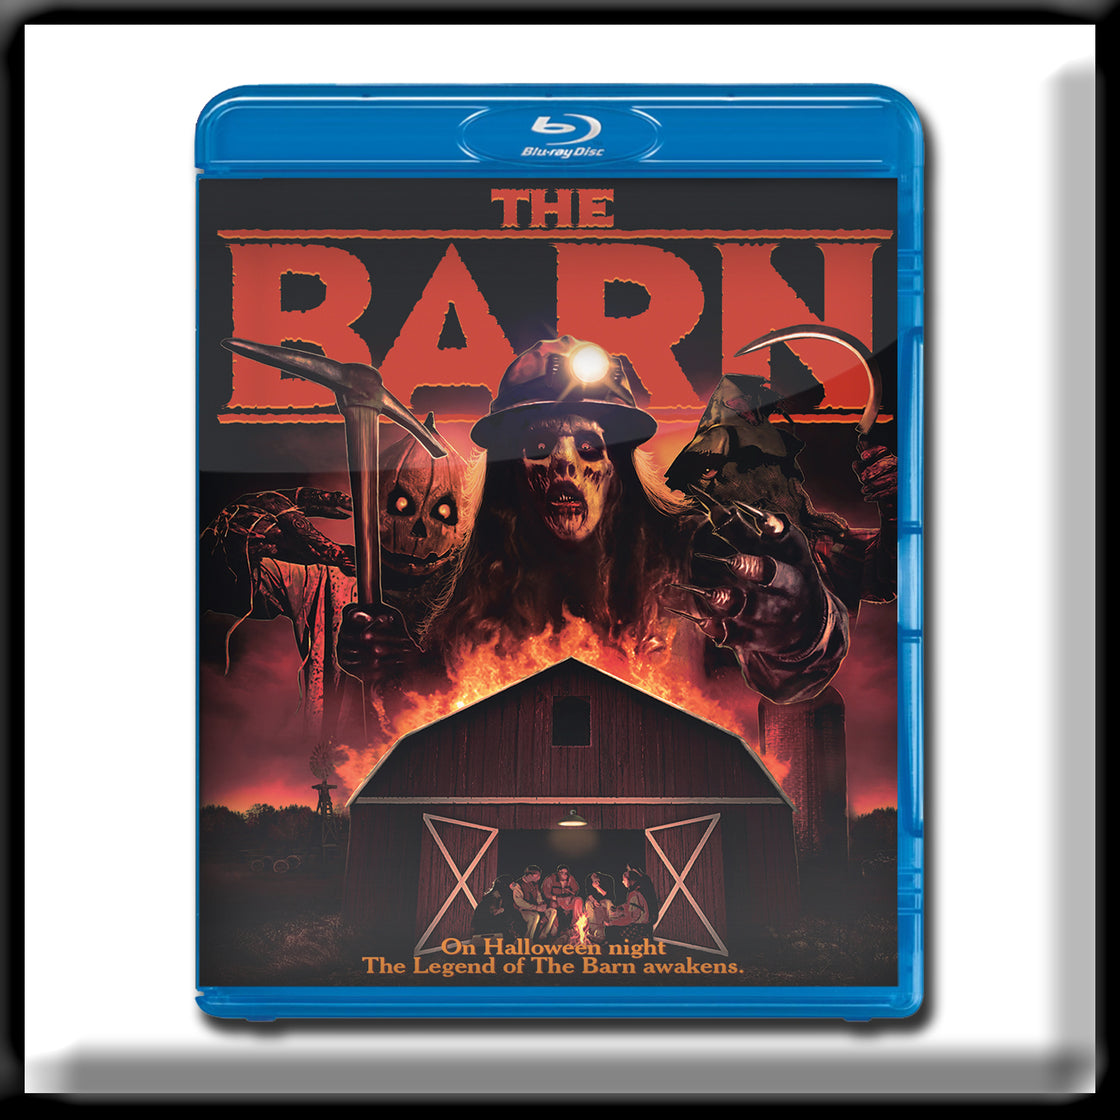 The Barn - (Blu-ray) Special Edition